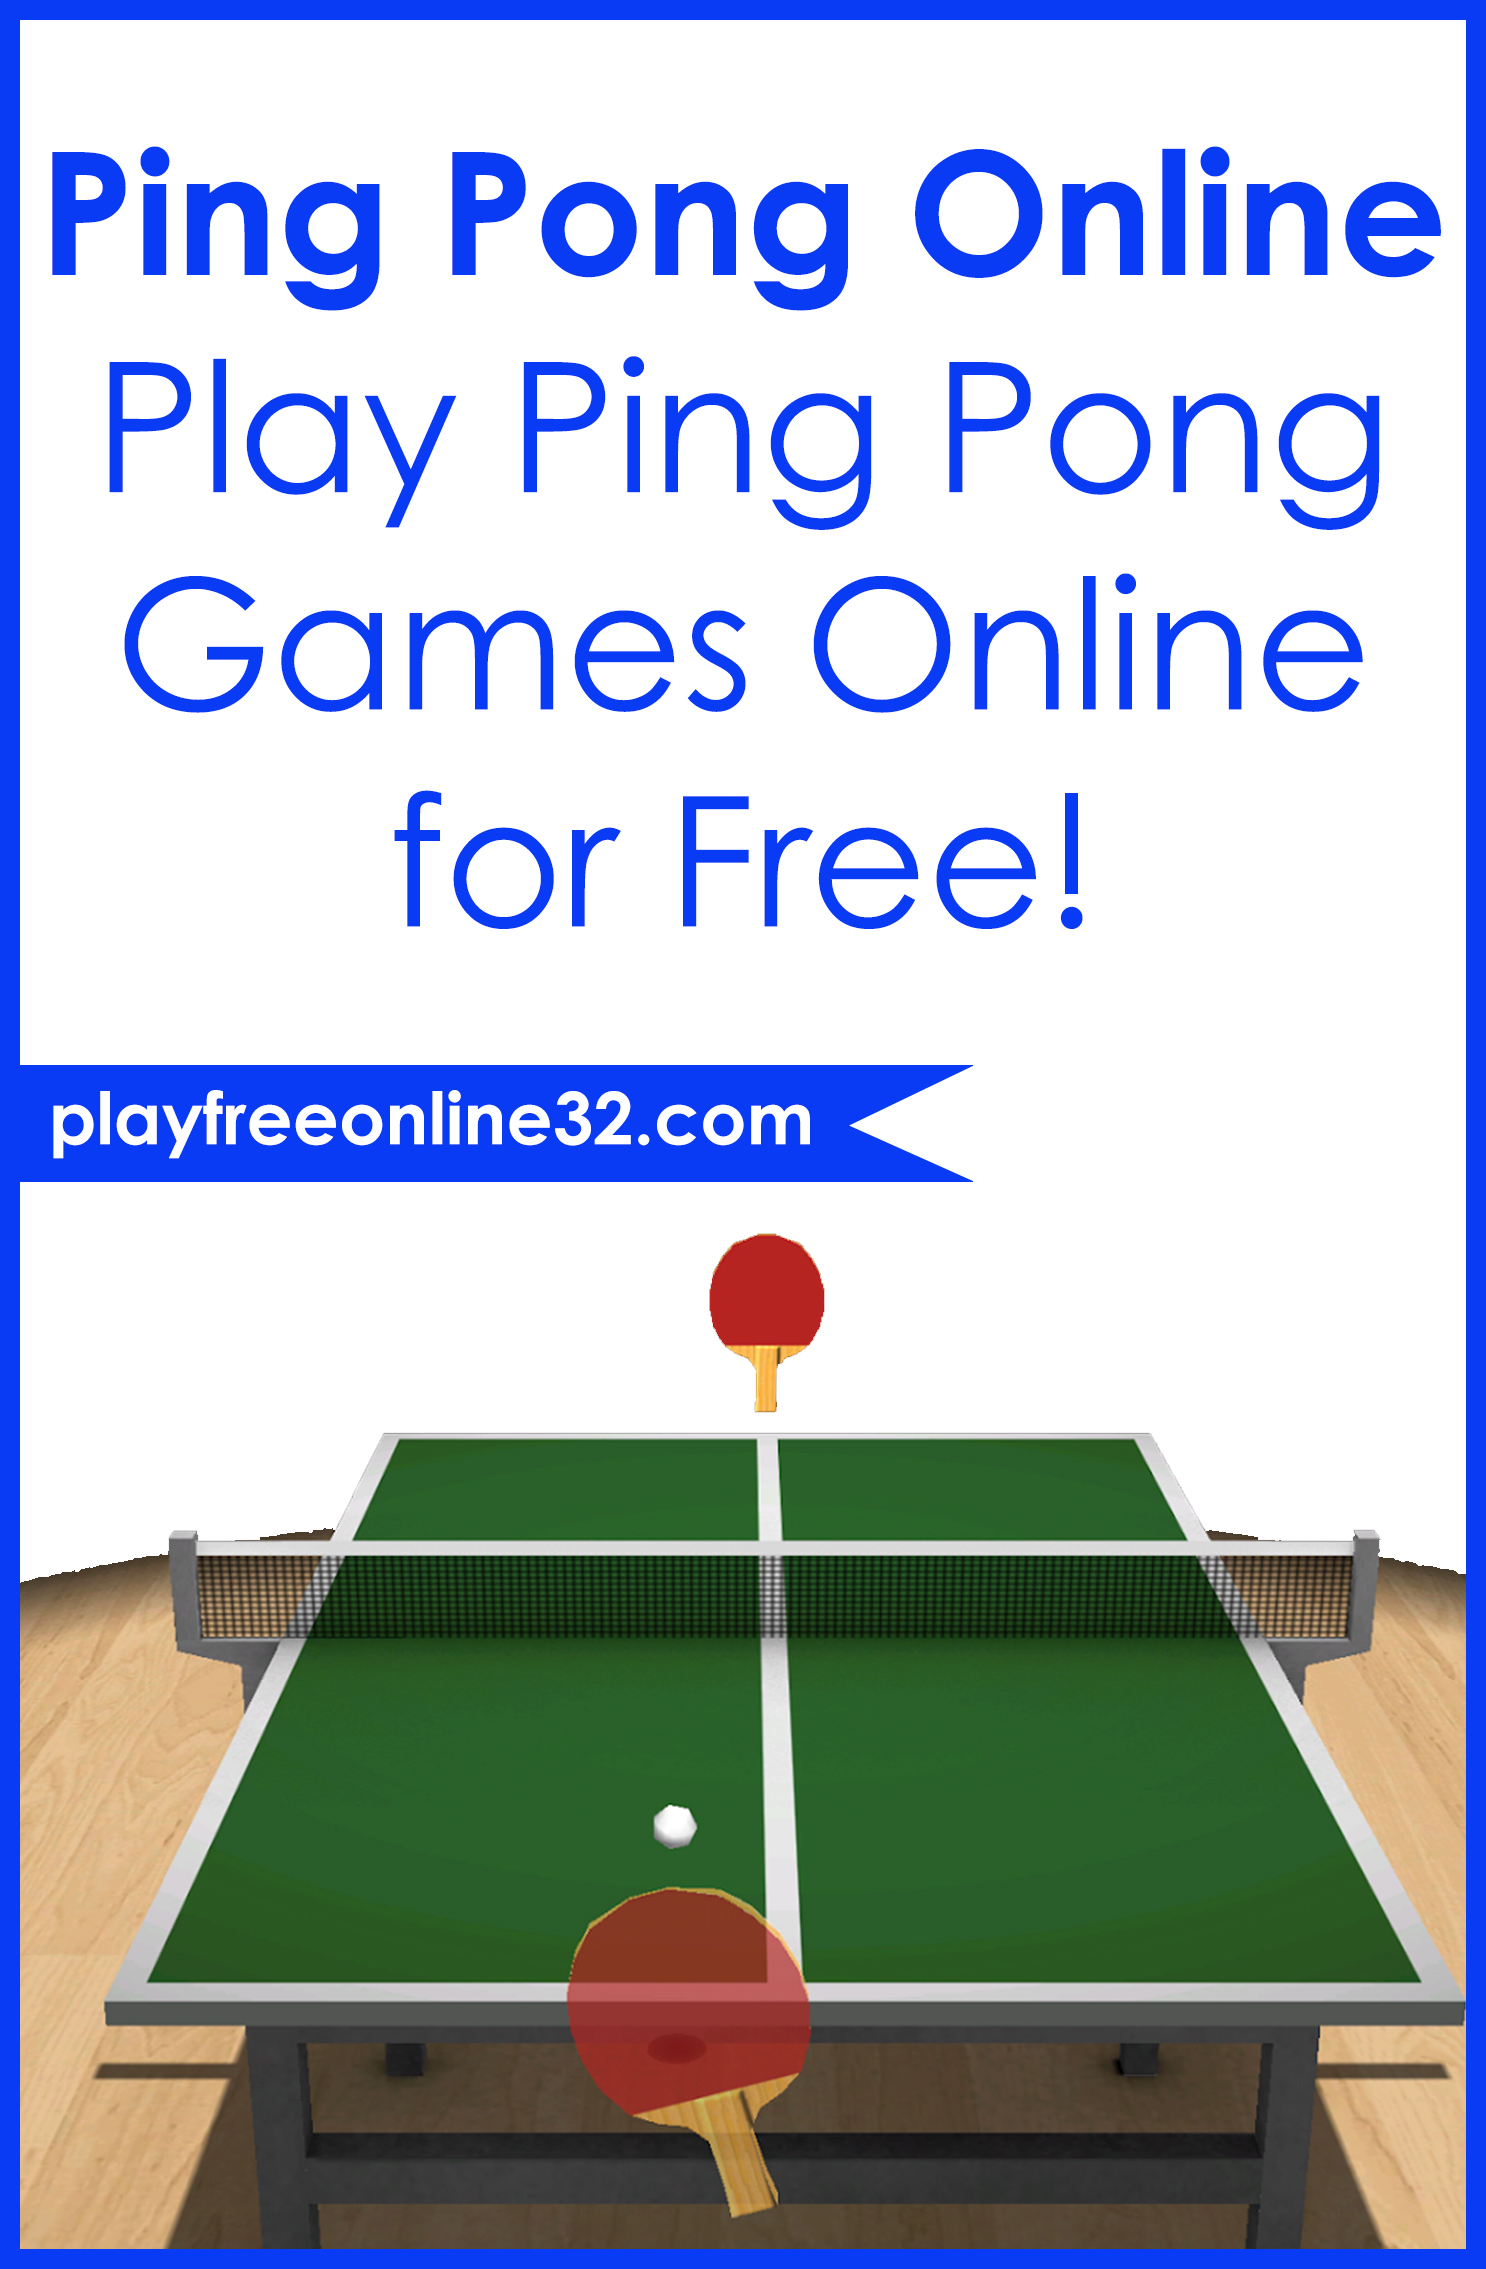 Ping Pong Online • Play Ping Pong Games Online for Free!